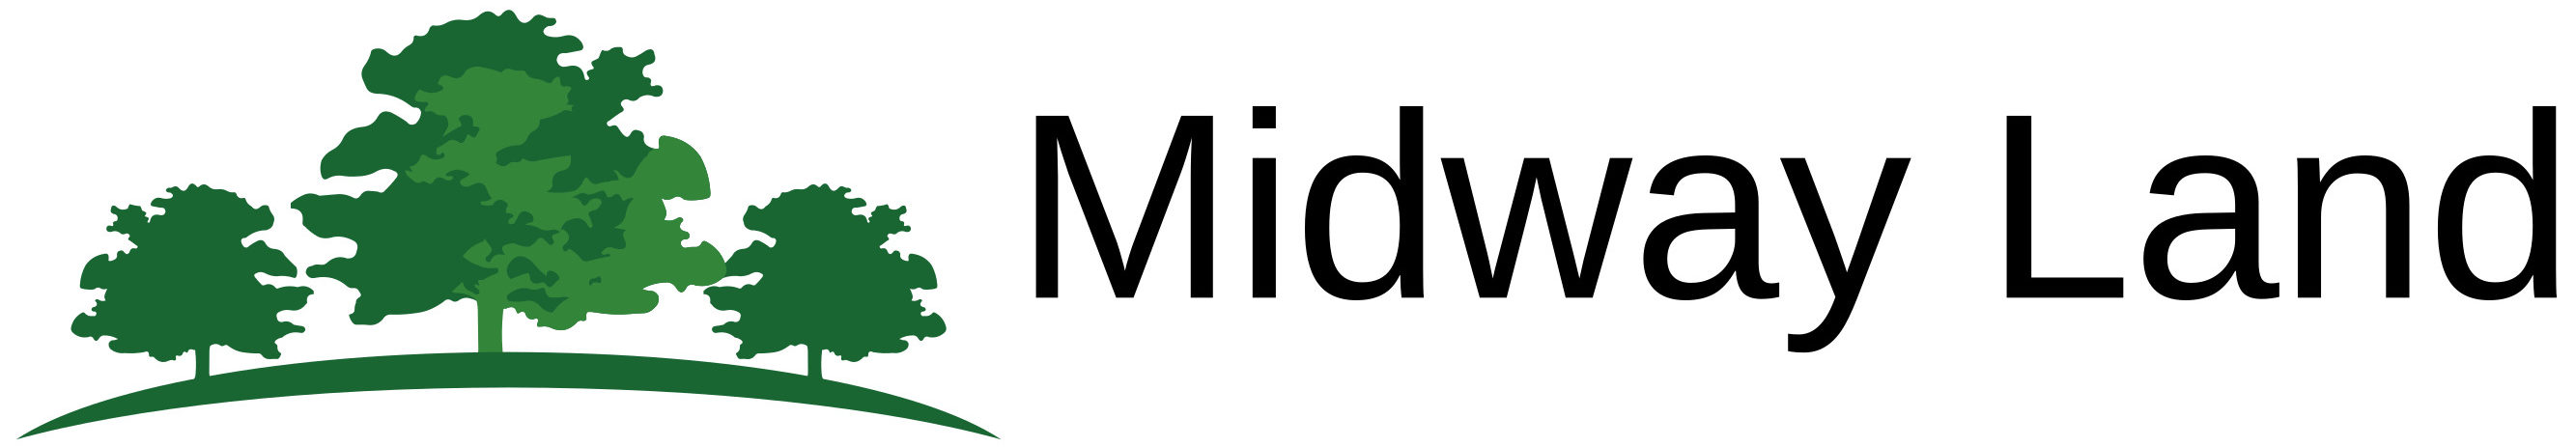 Midway Land